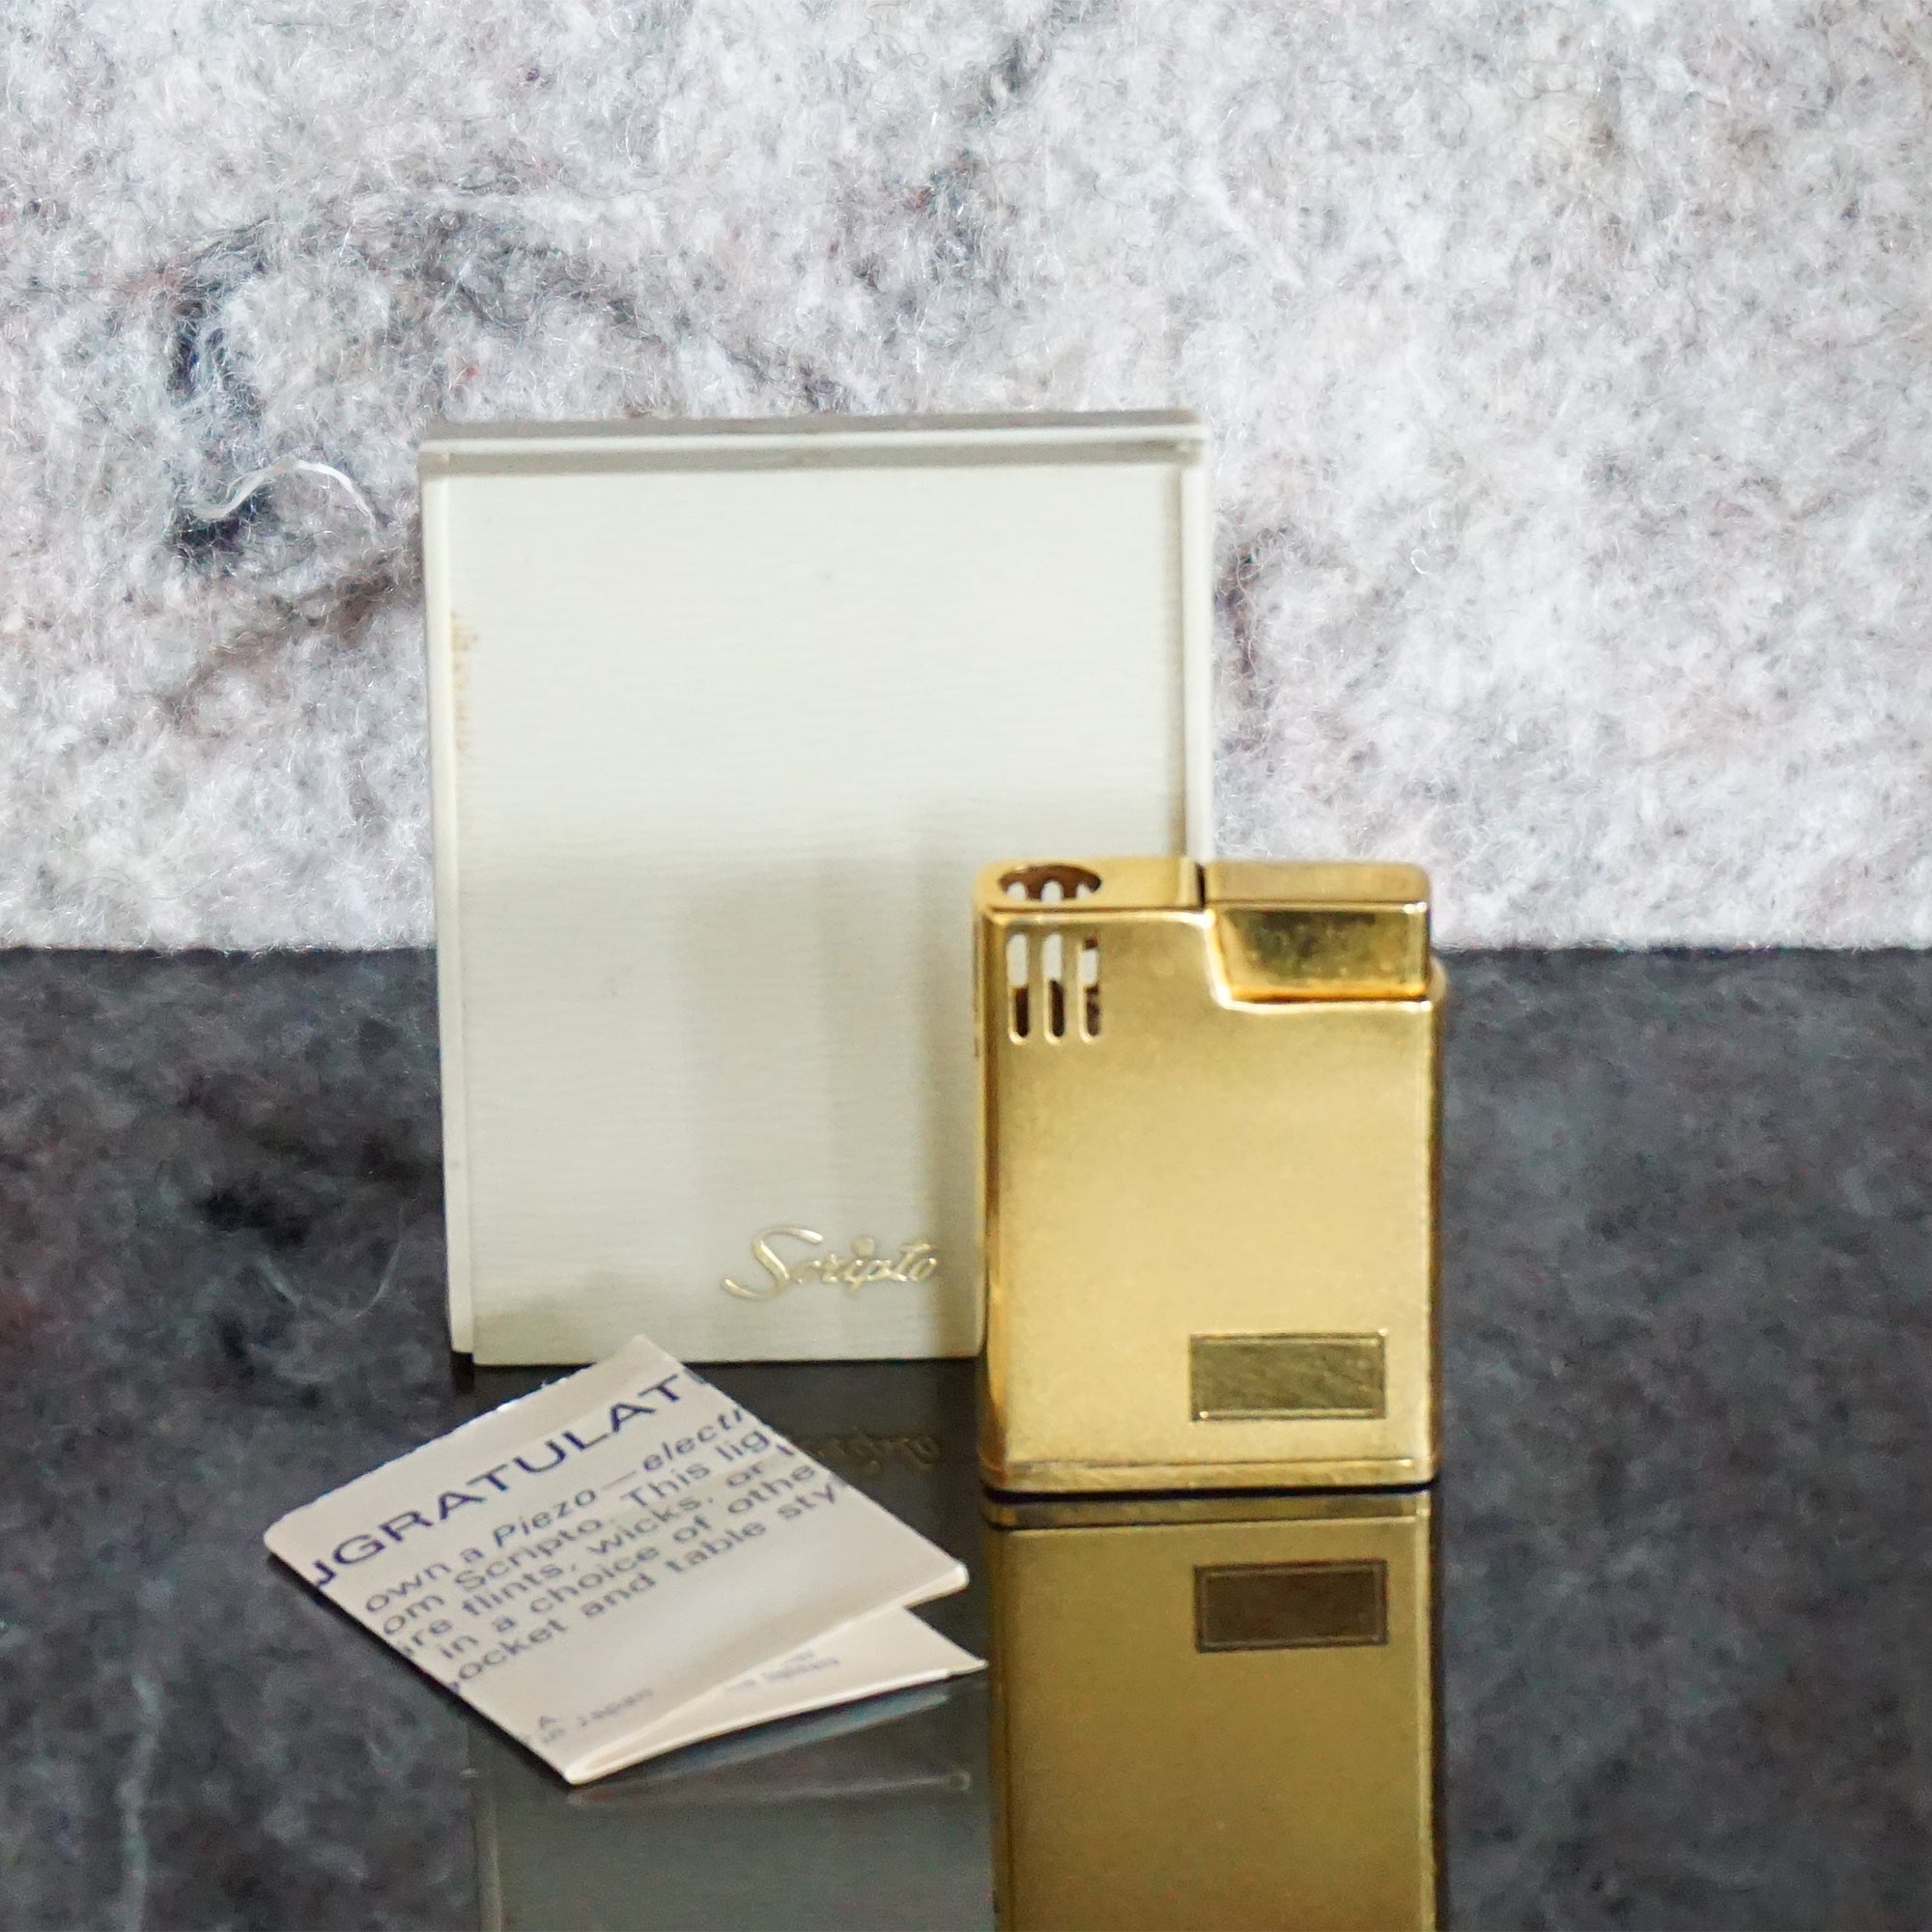 Collectible Vintage Gold Toned Piezoelectric Butane Lighter from SCRIPTO. Made in Japan.